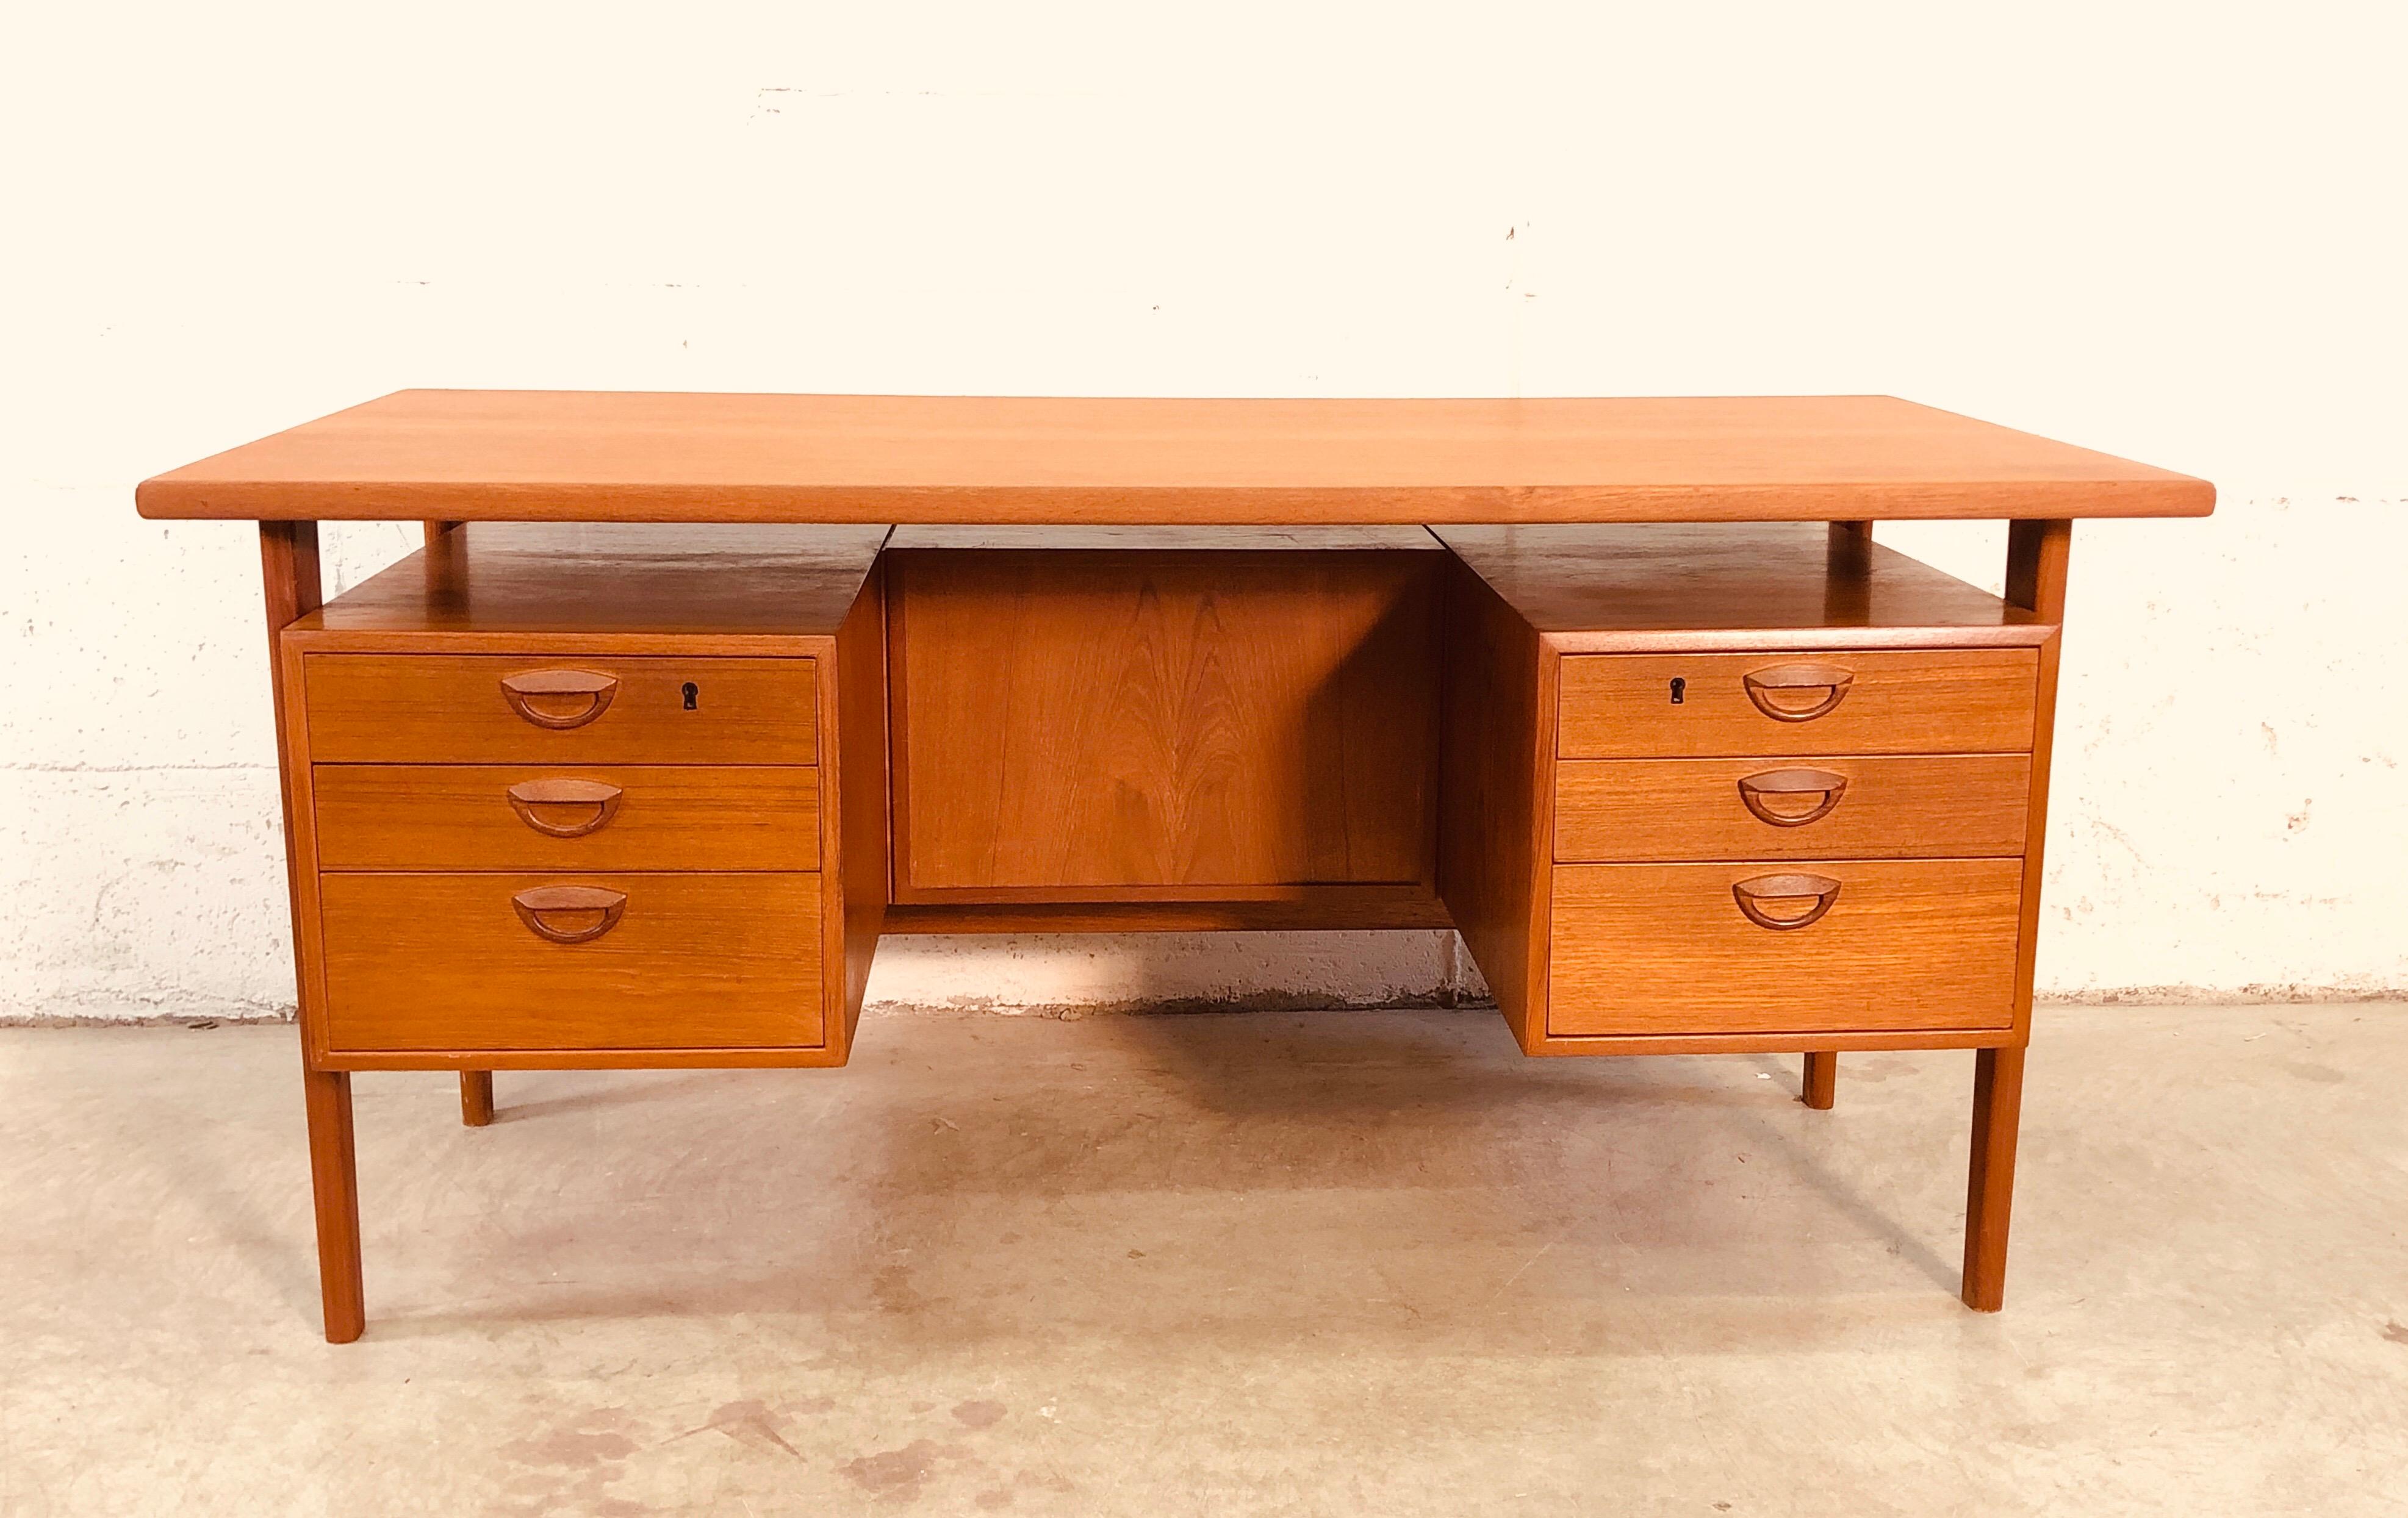 Executive Danish teak desk designed by Kai Kristiansen with a floating top and six drawers for storage. The desk also has built in storage for books or display. In excellent refinished condition. No marks. Knee hole measures: 20.75” L x 17.5” D and